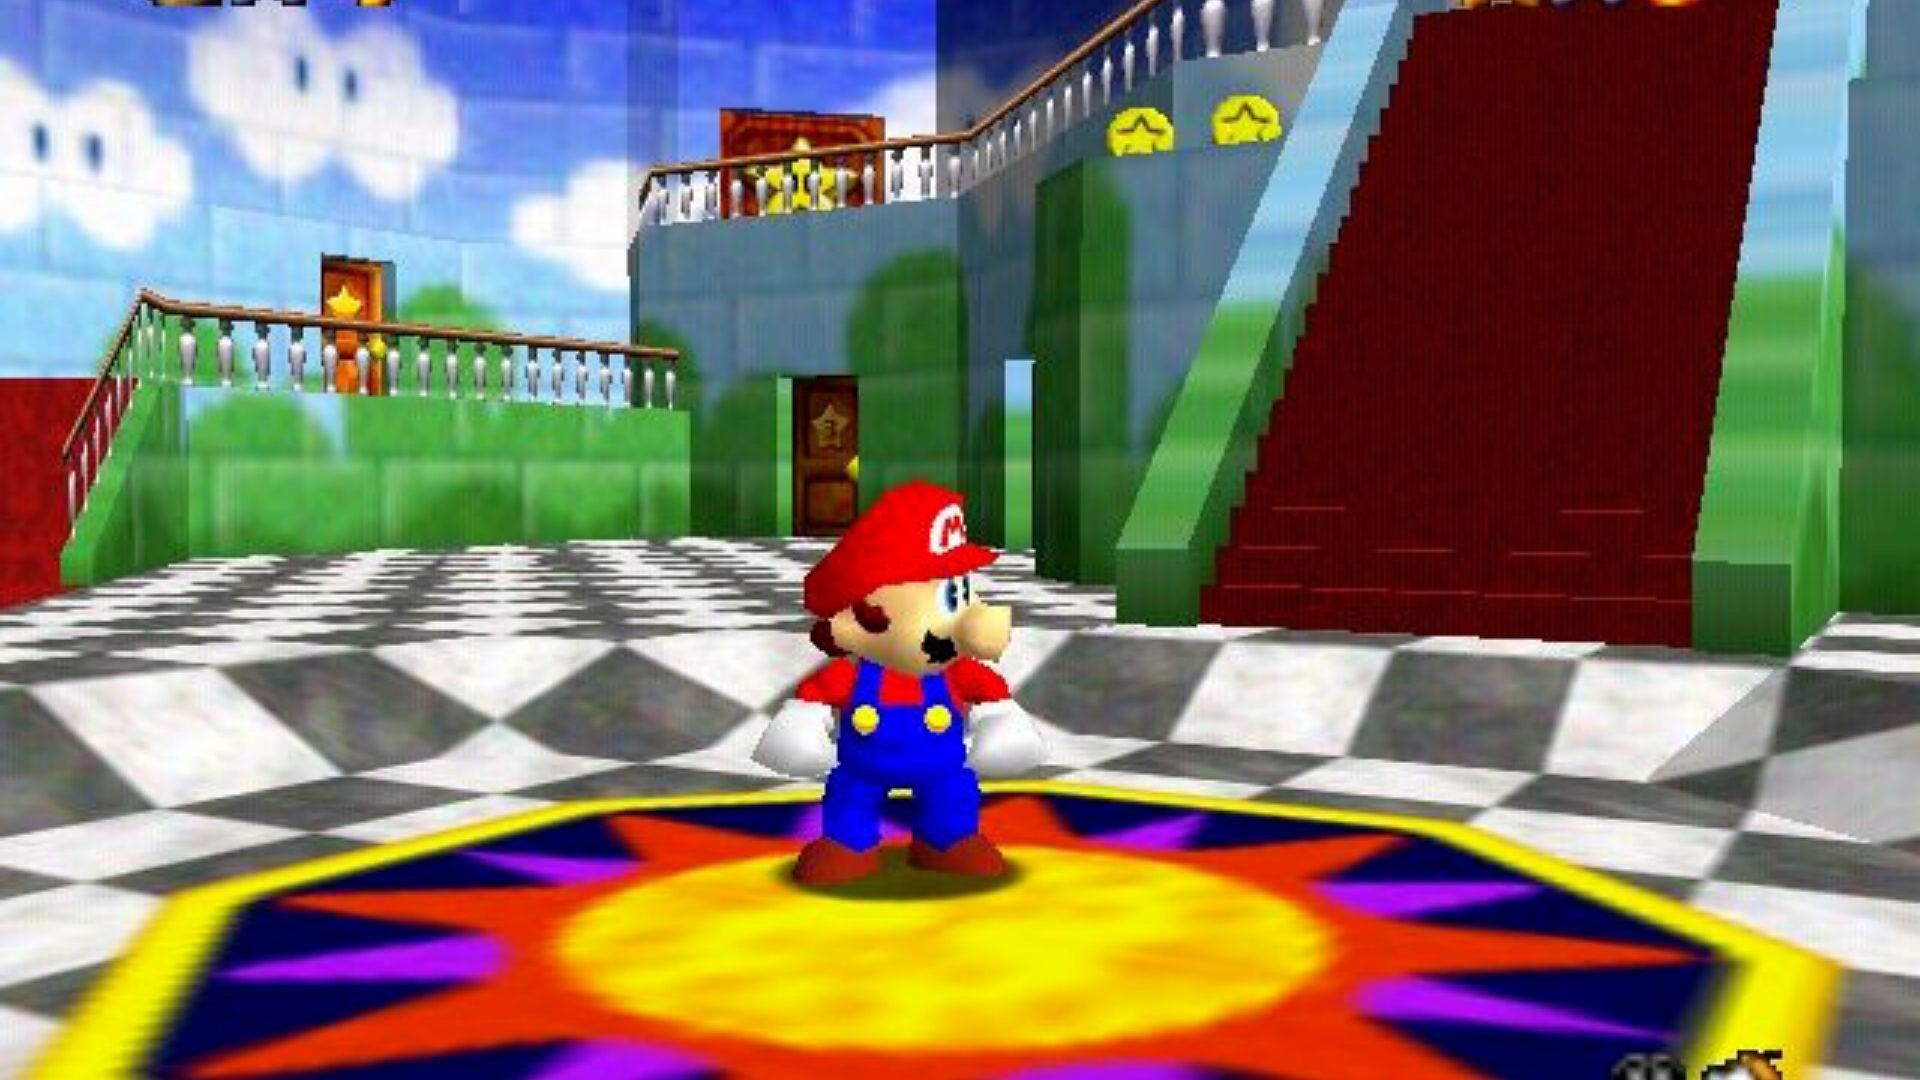 Mario in Peach's castle by a staircase in a screenshot from Super Mario 64.